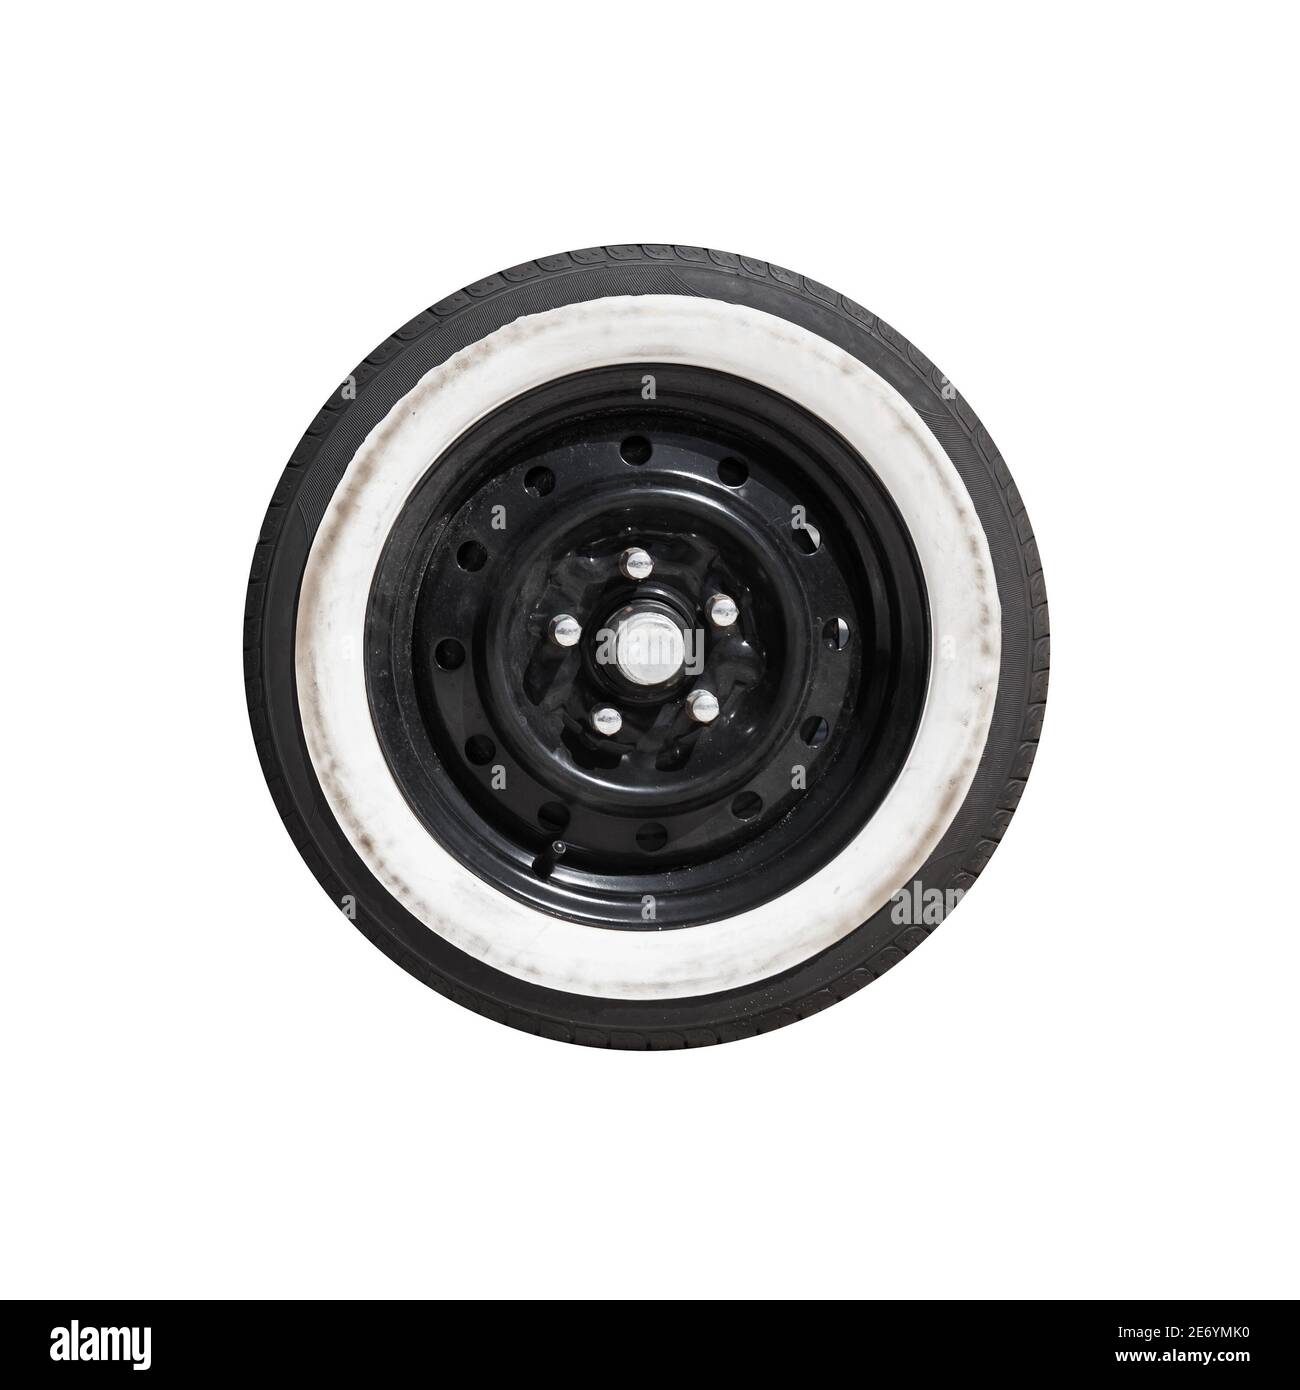 Black truck wheel with white stripe painted over tire. Close up object photo isolated on white background Stock Photo